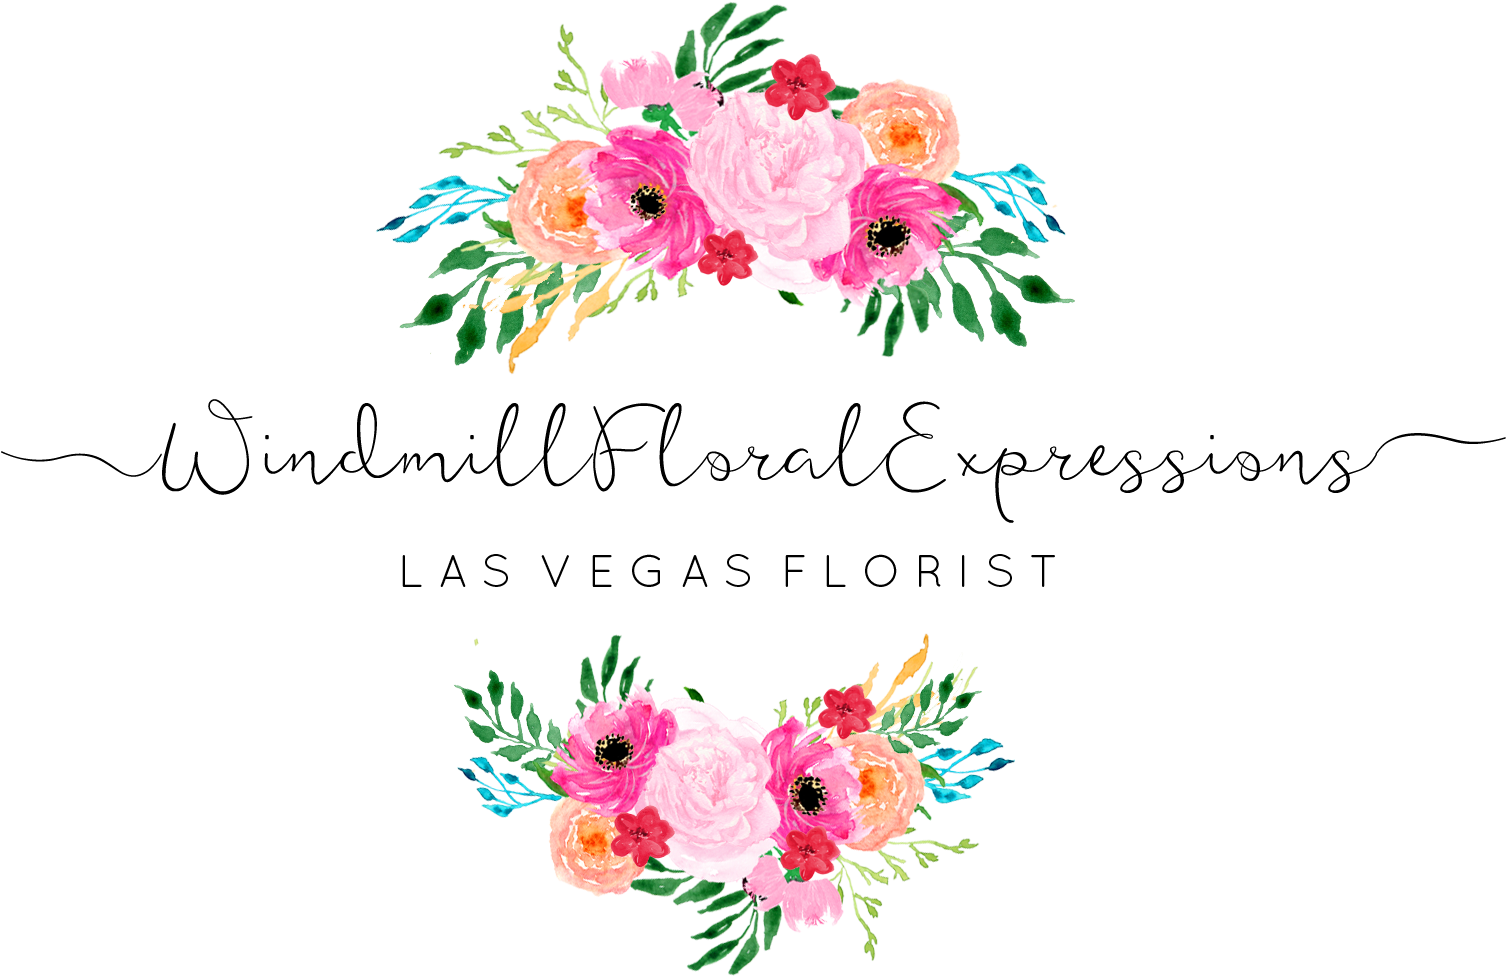 Windmill Floral Expressions - Flower Design With Calligraphy (1548x1023)